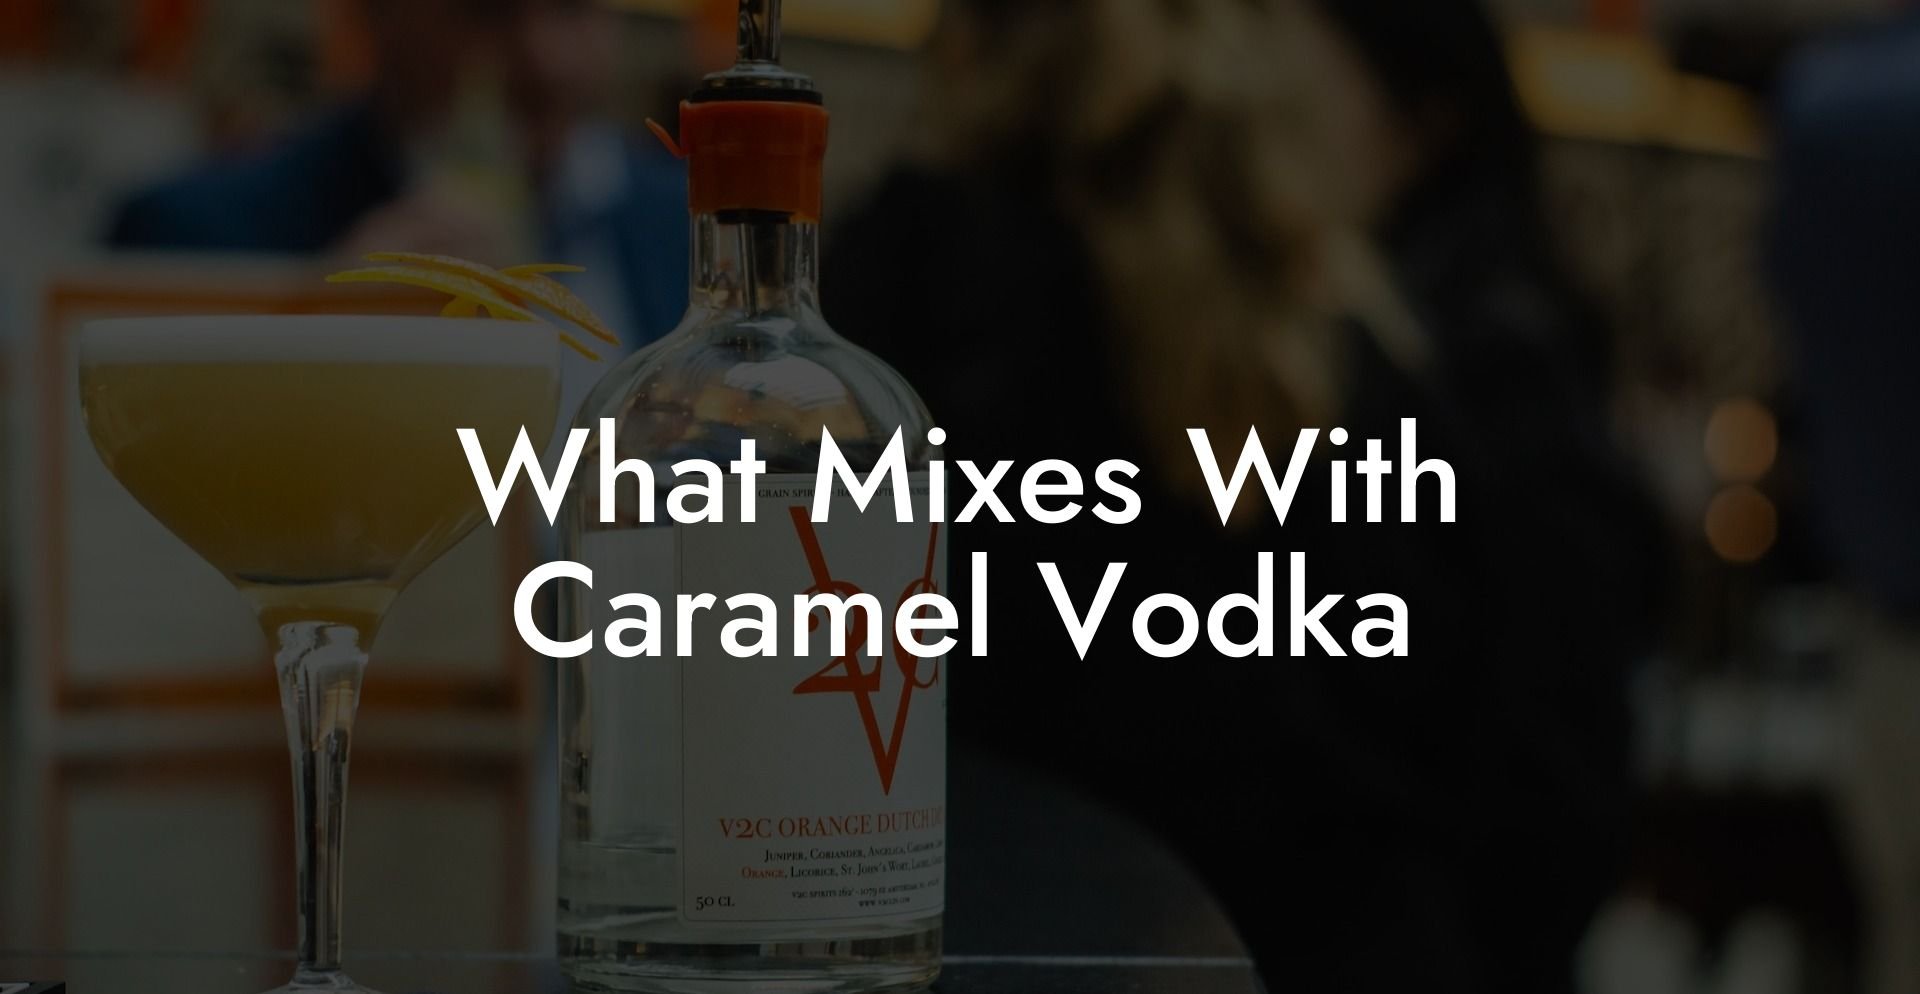 What Mixes With Caramel Vodka